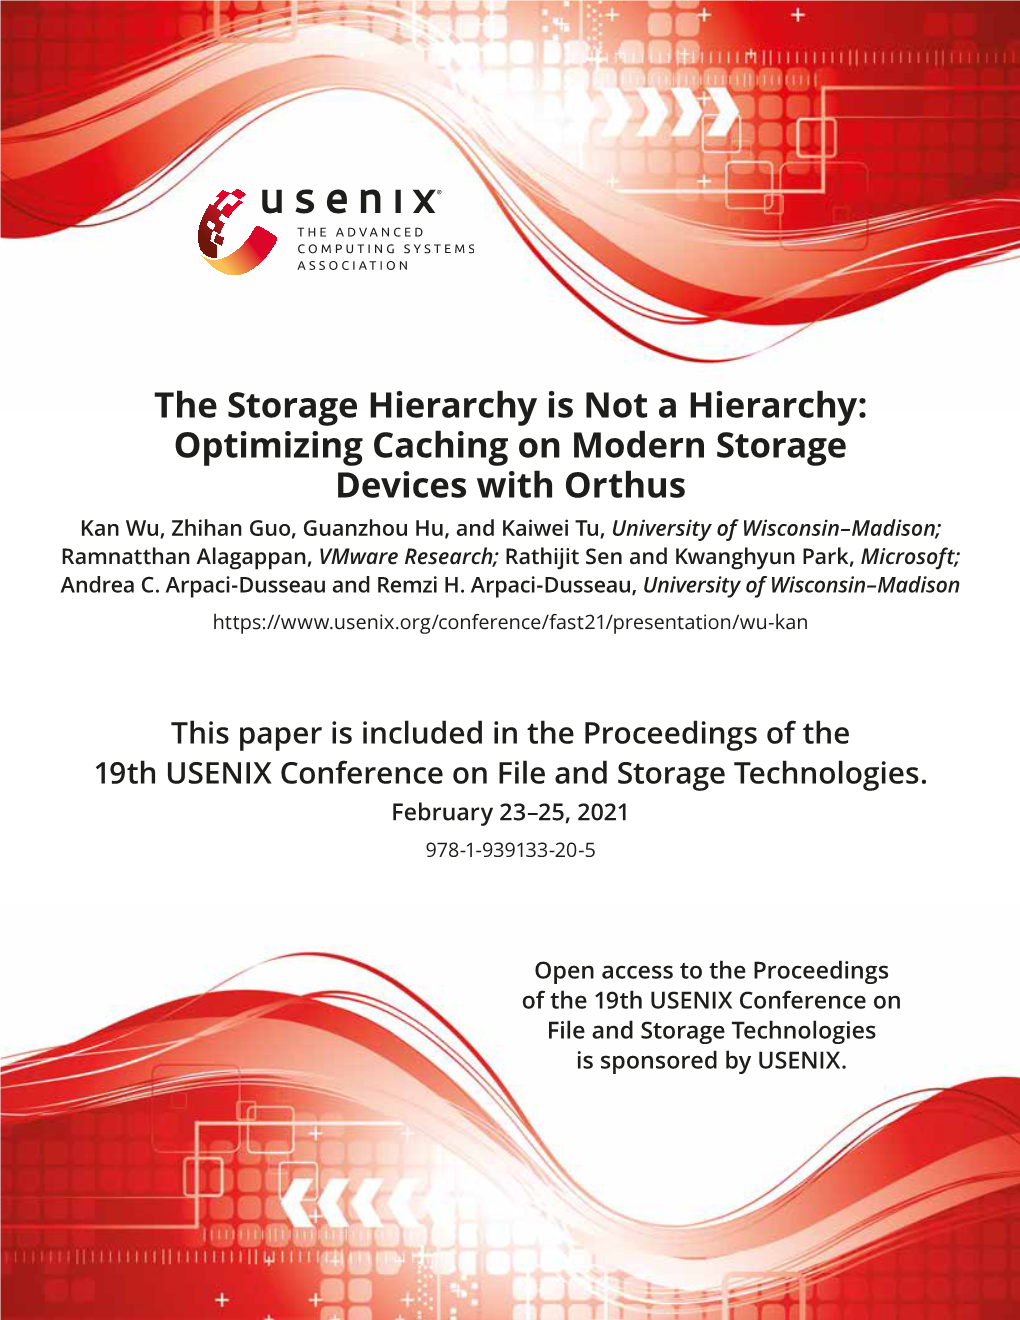 Optimizing Caching on Modern Storage Devices with Orthus